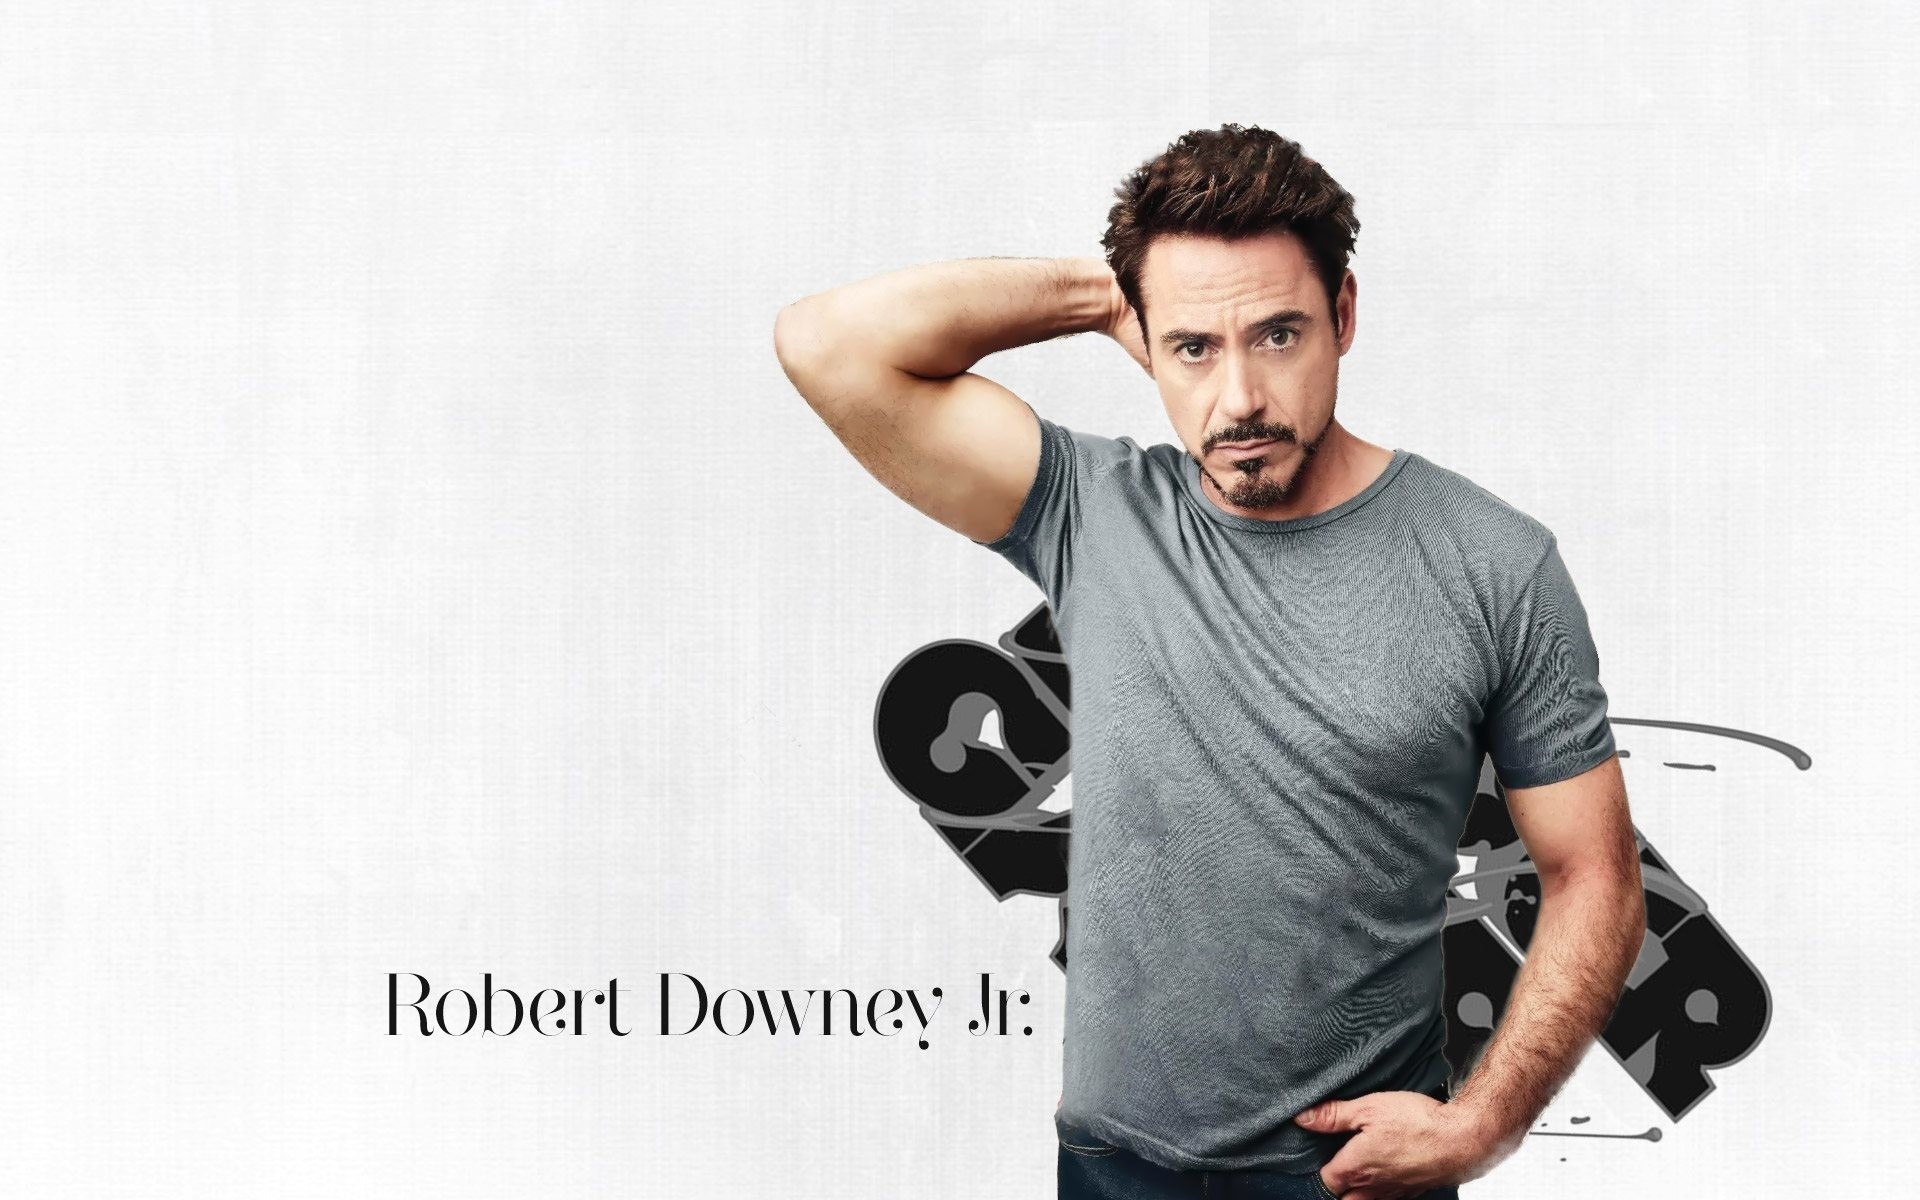 1920x1200 One of the best actors is - Robert Downey Jr - and for him was created this  fan art wallpaper Â· So, if you like Robert Downey Jr, download the wallpaper  ...